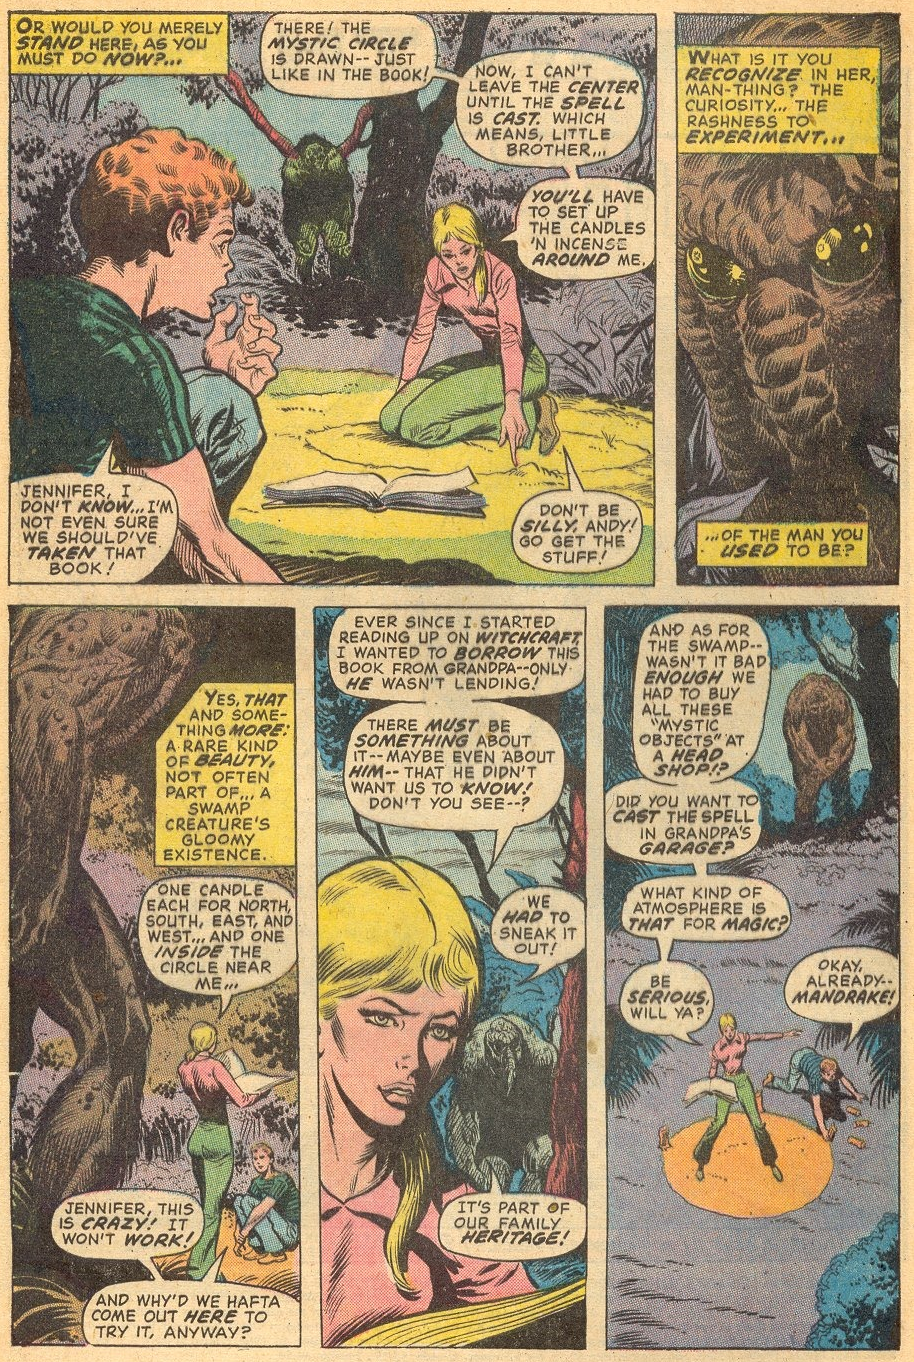 Jennifer Kale and her brother Andy prepare to summon the demon Thog in Fear Vol. 1 #11 "Night of the Nether-Spawn!" (1972), Marvel Comics. Words by Stever Gerber, art by Rich Buckler, Jim Mooney, and Jean Izzo.